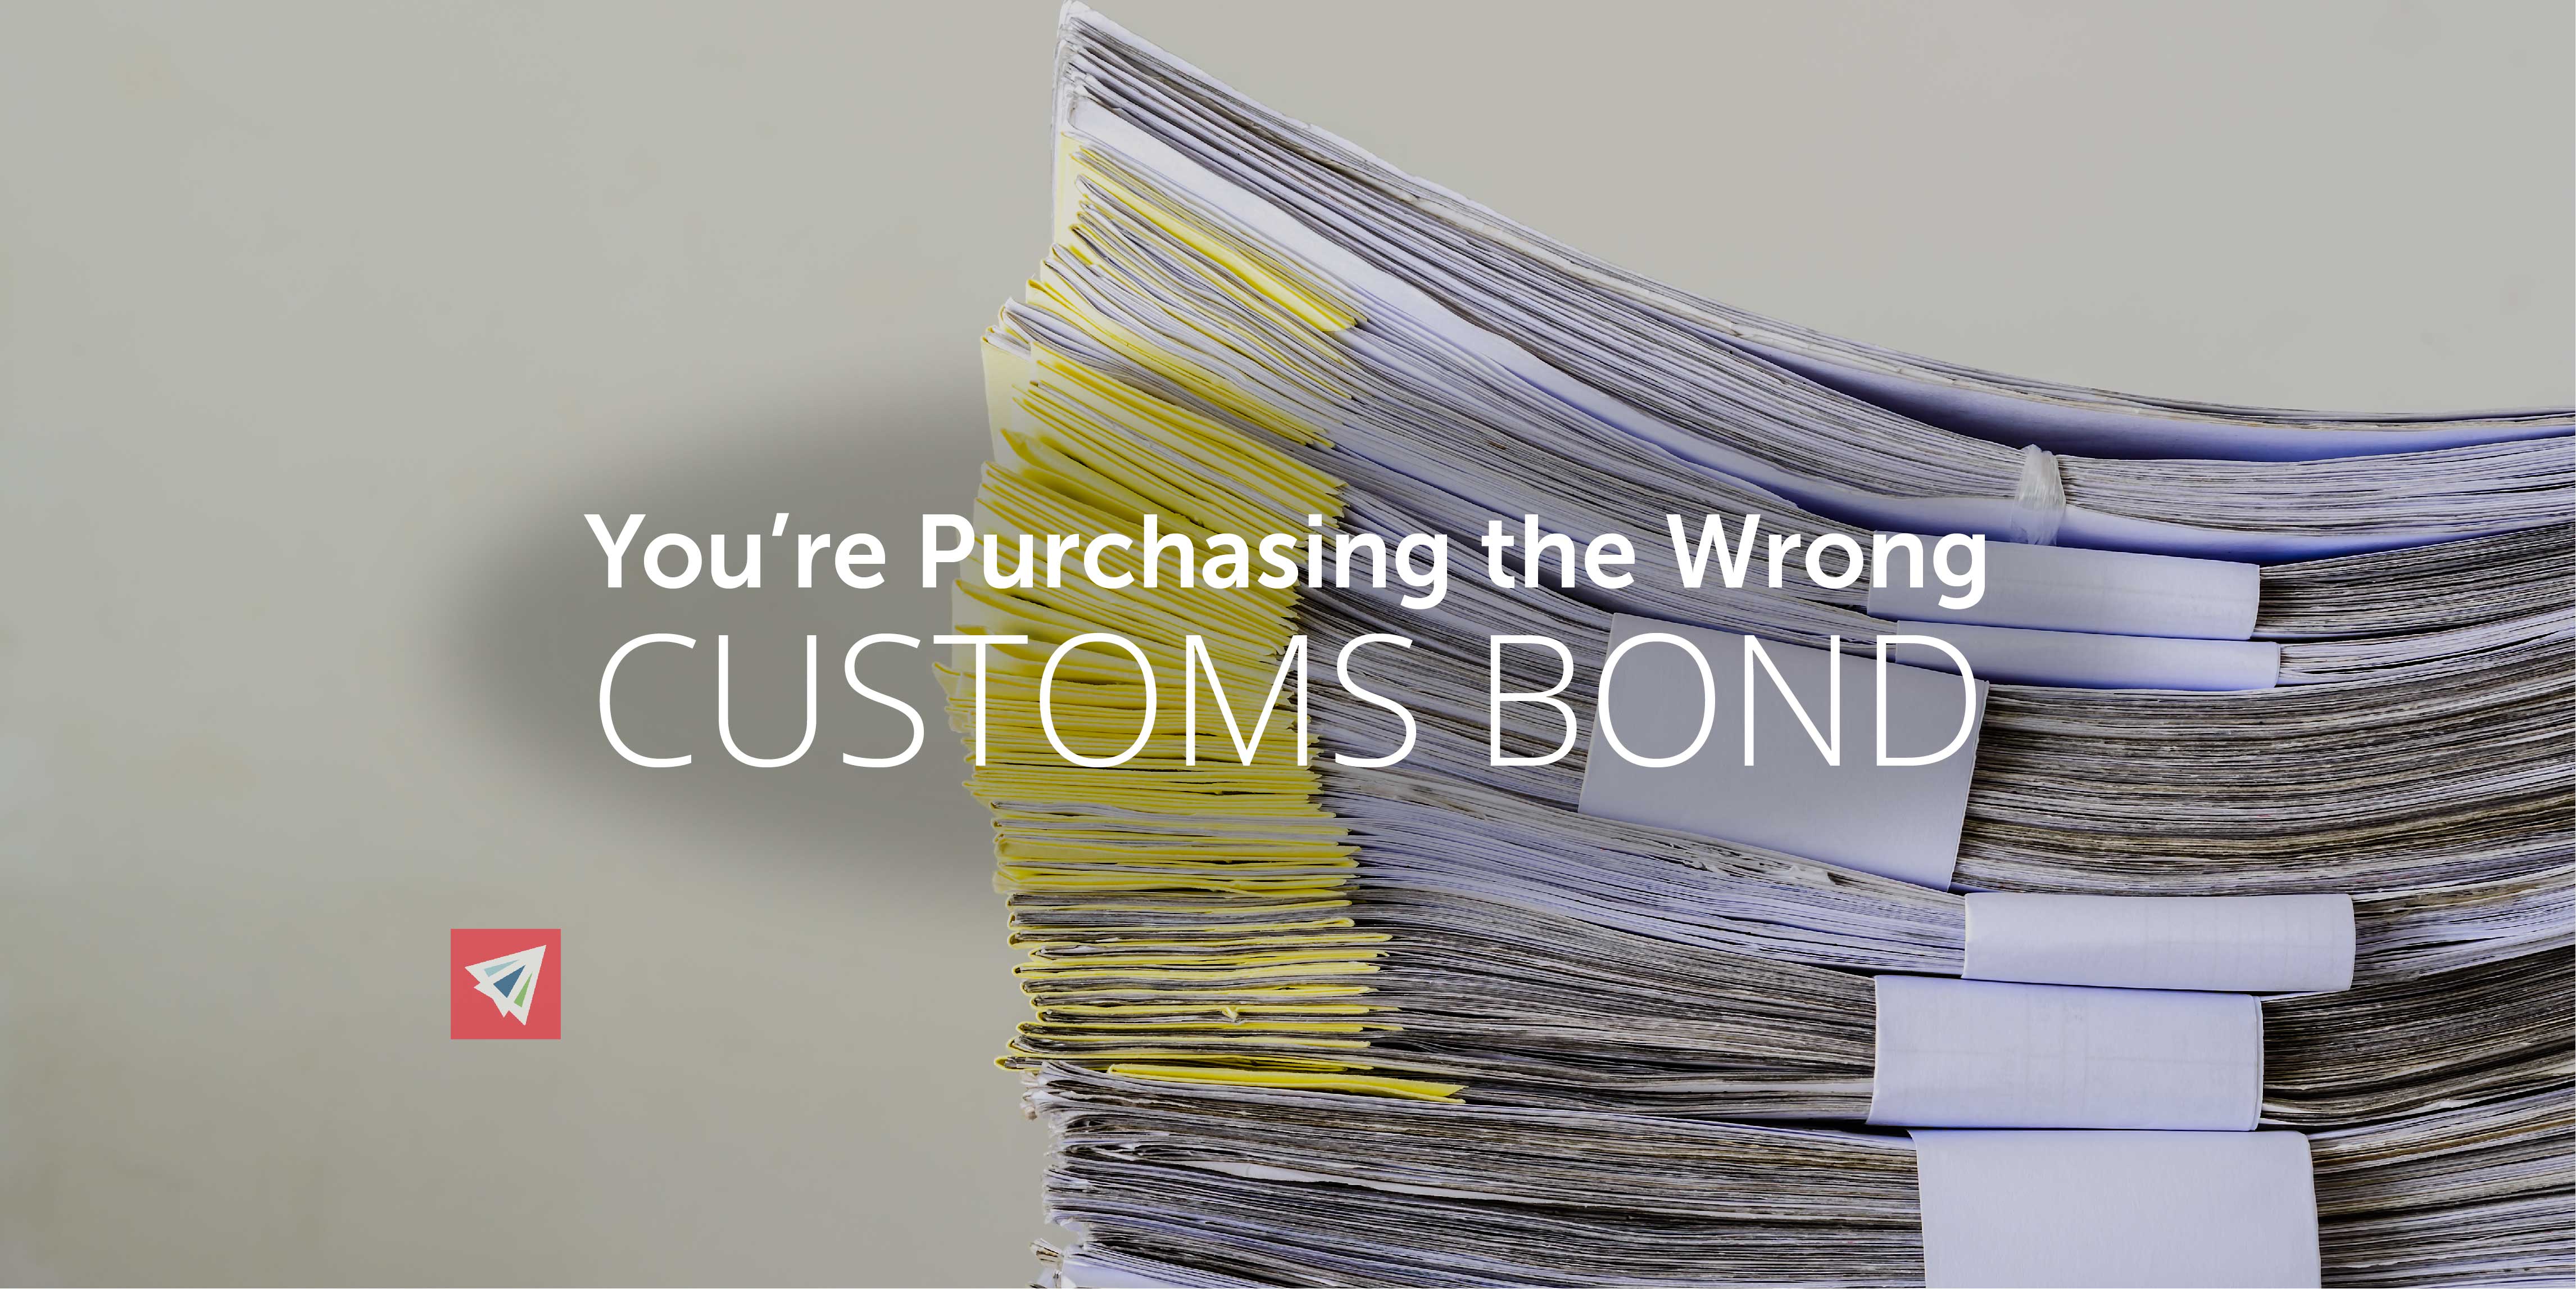 You’re Purchasing the Wrong Customs Bond